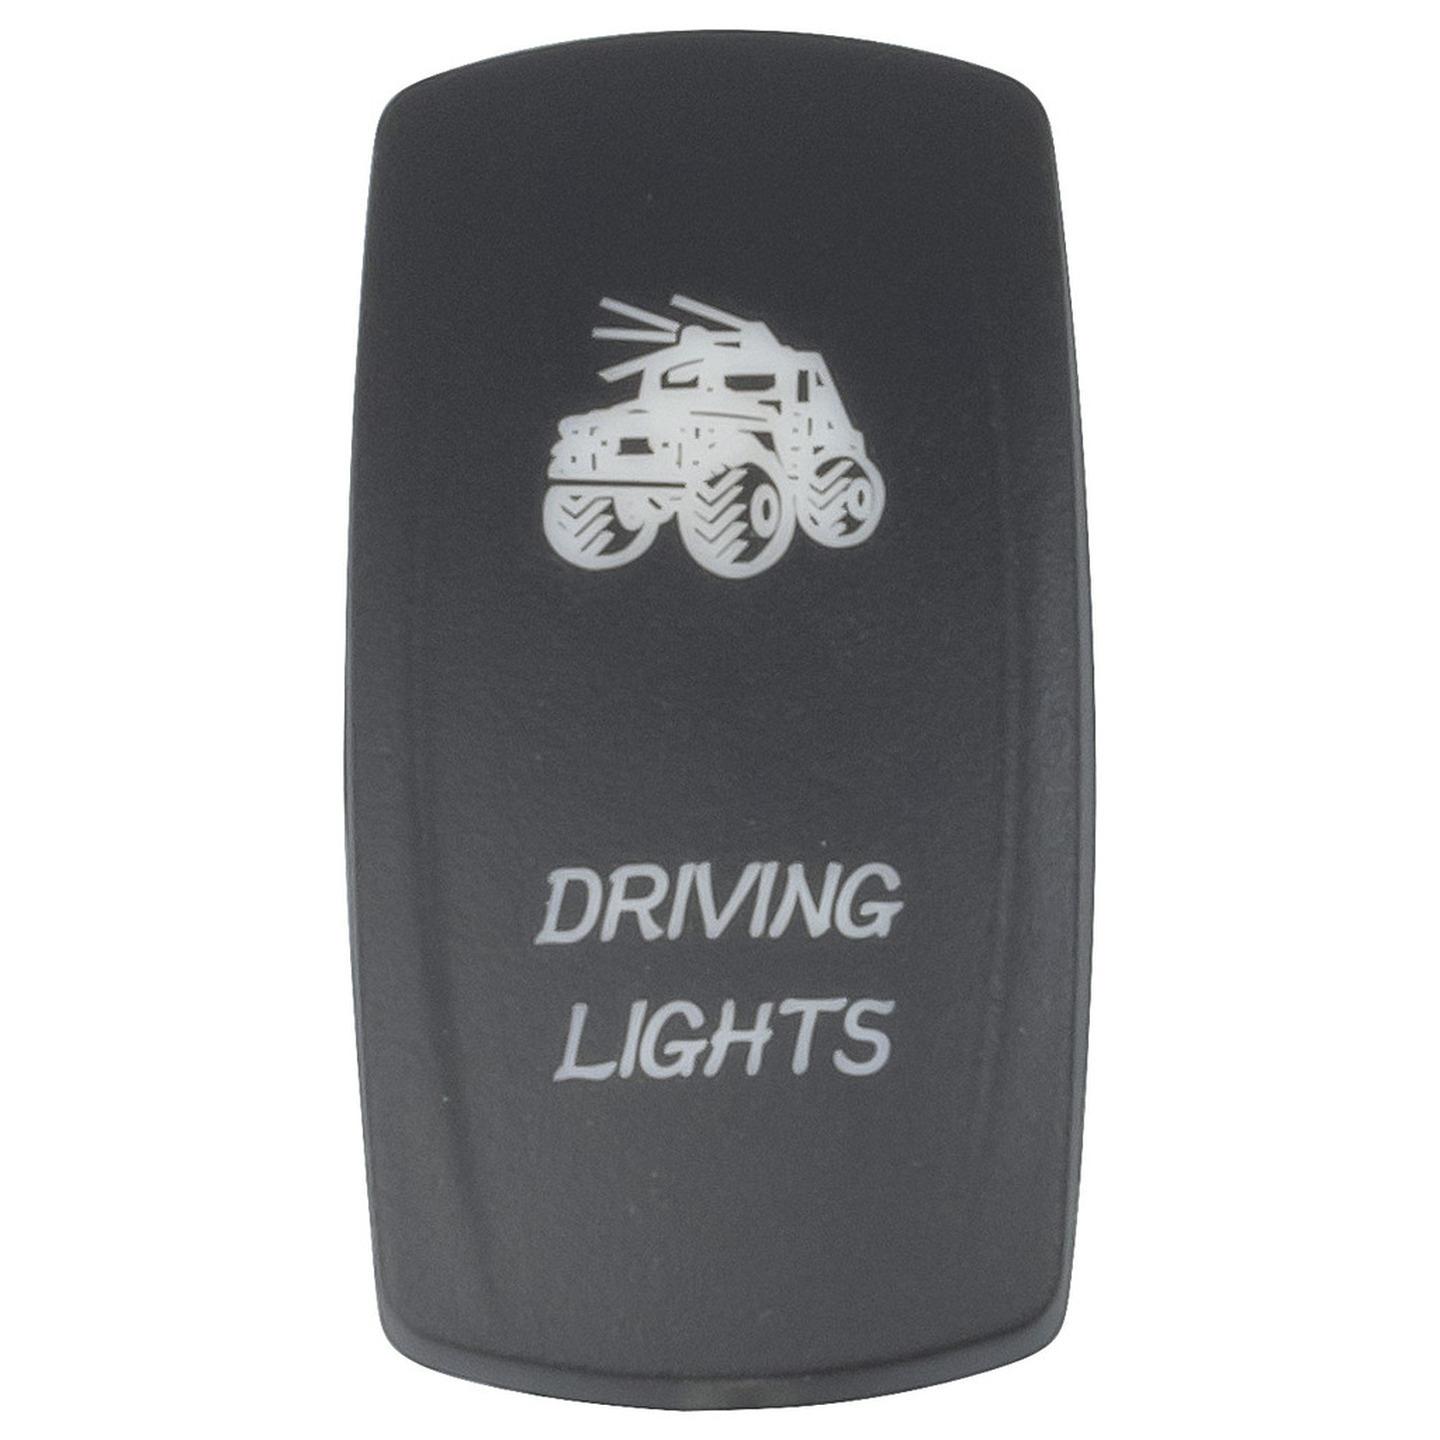 Laser Etched Driving Lights Cover for Illuminated Rocker Switch